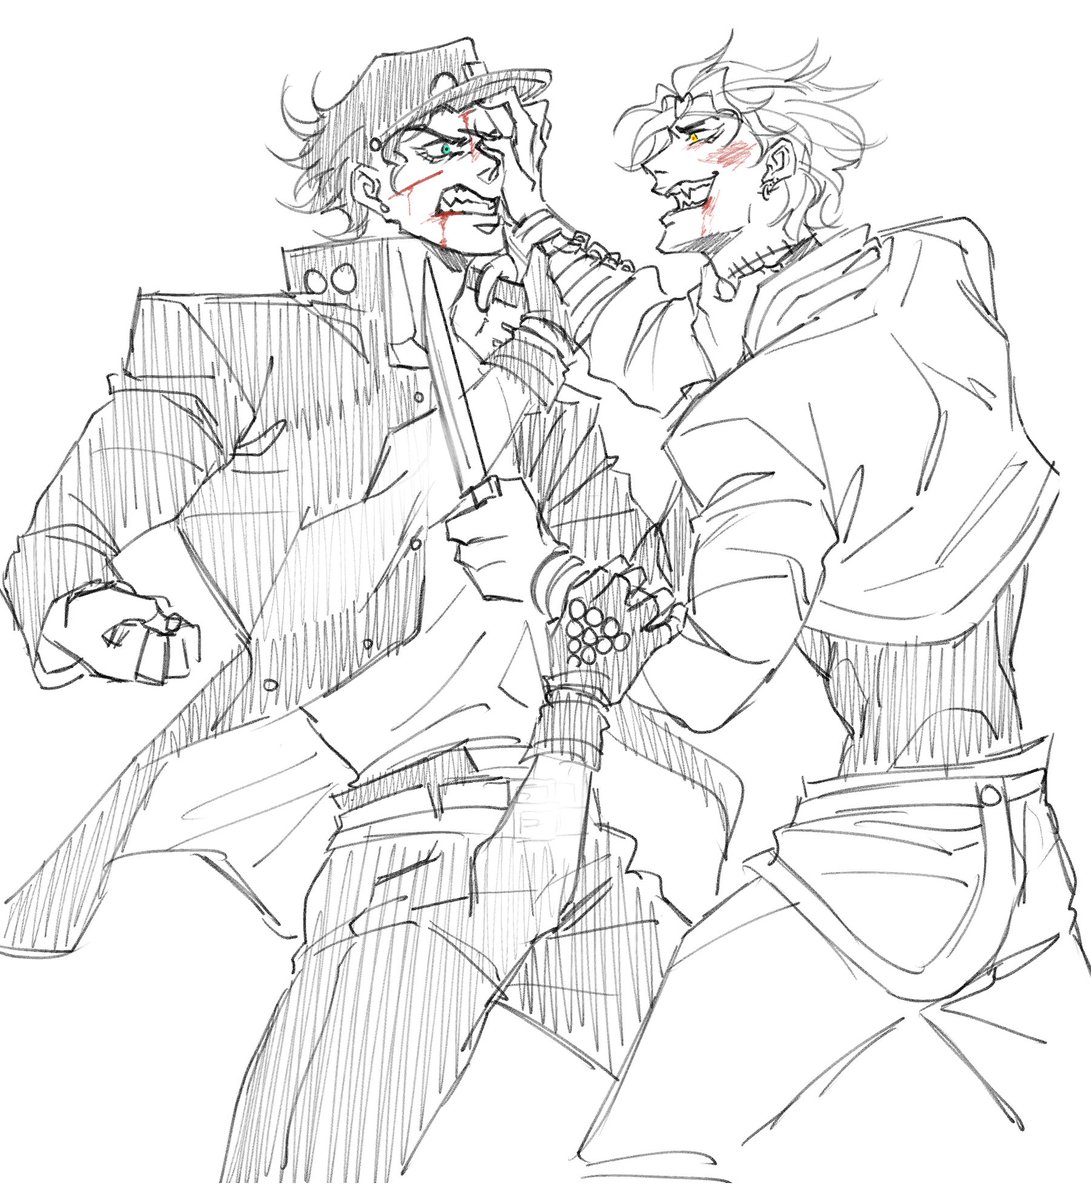 kinda wanna see jotaro and dio fight like 10 year olds idk why.